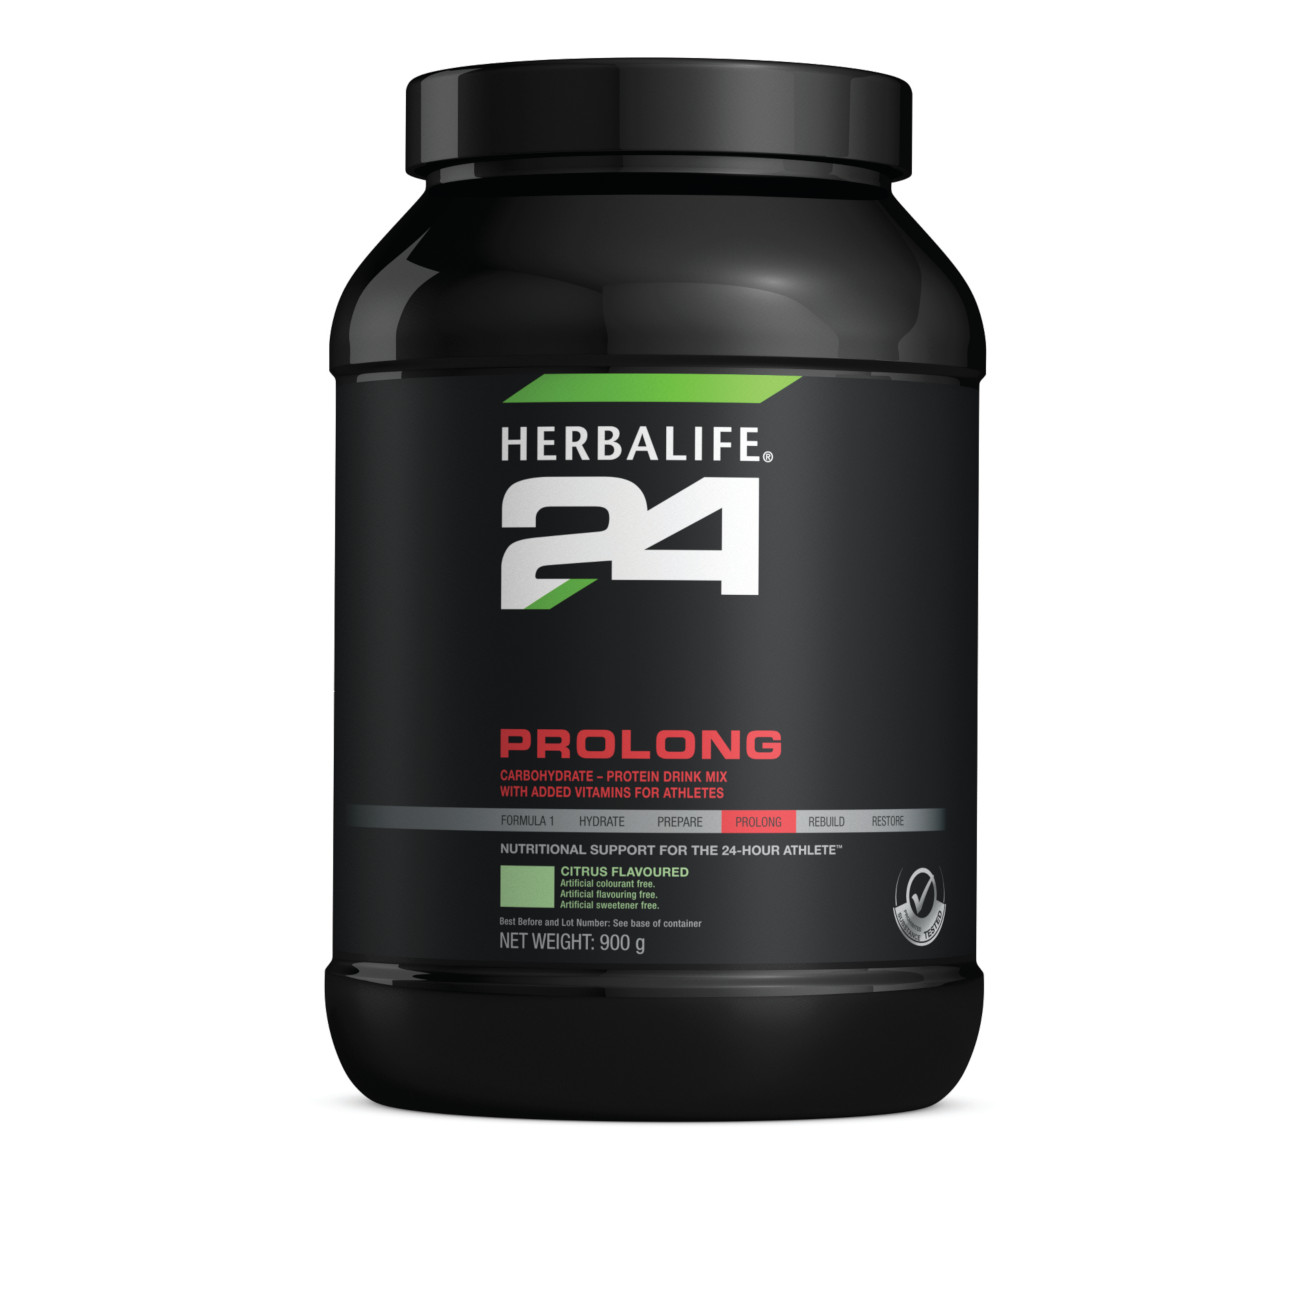 Herbalife24Â® Prolong Carbohydrate-Protein Drink Mix Citrus Flavoured product shot